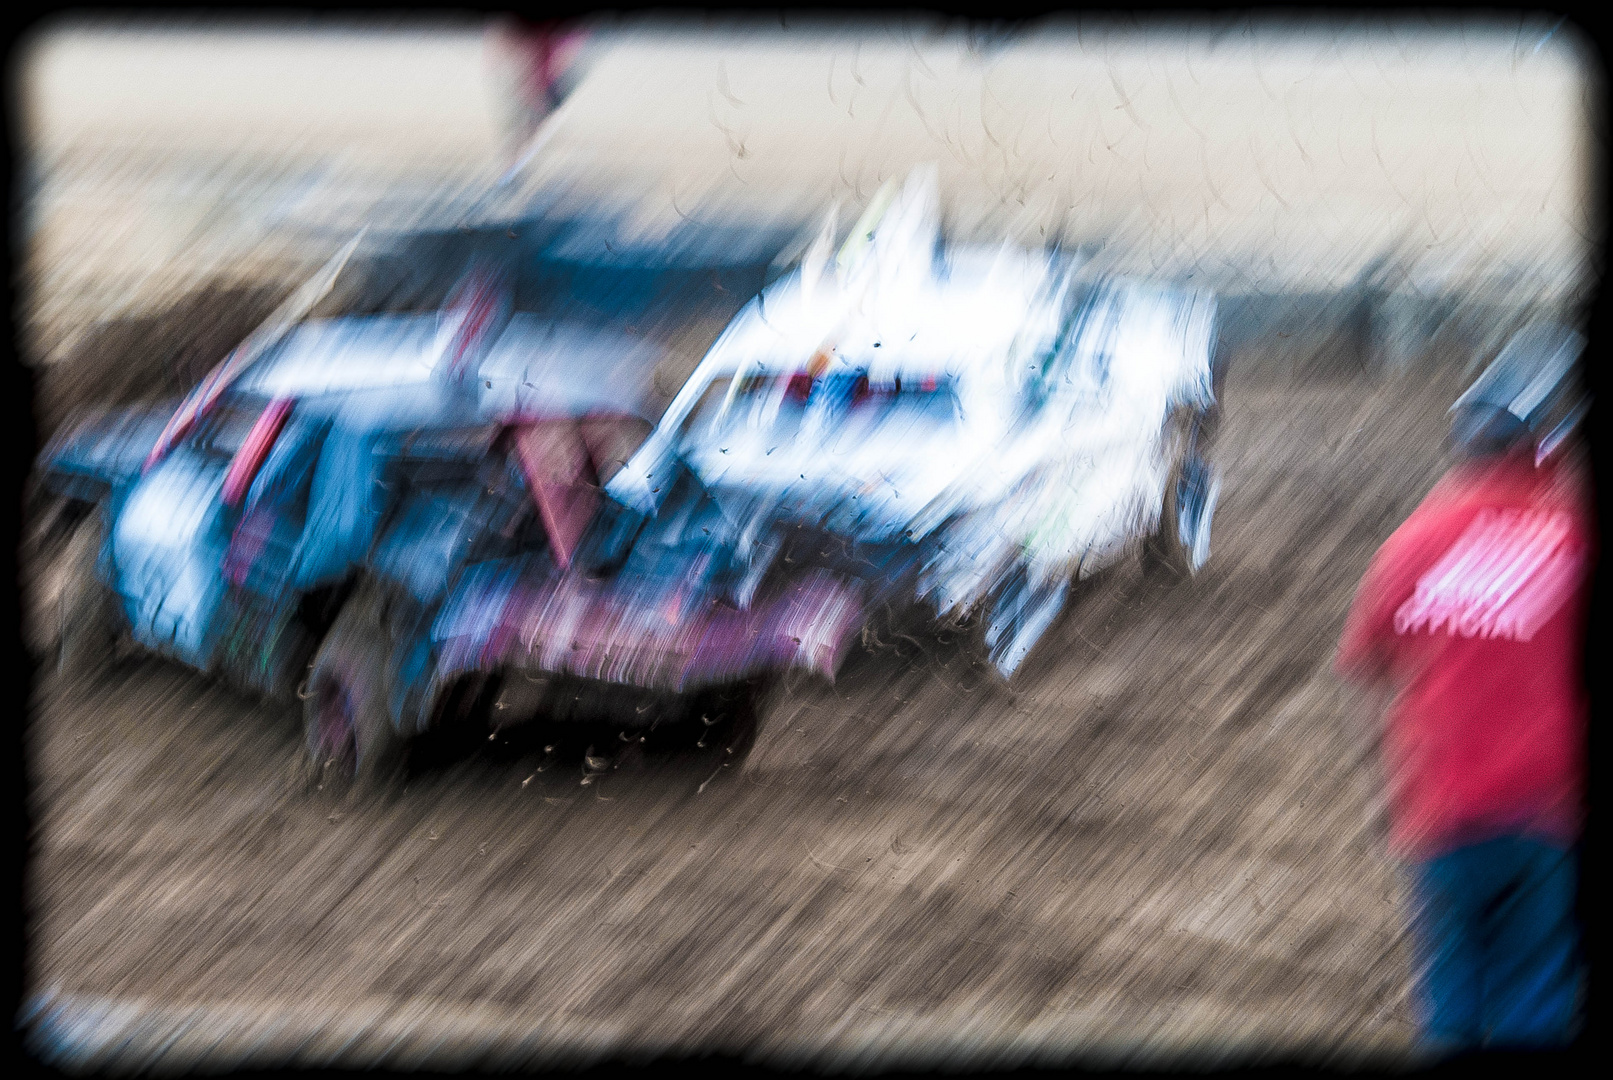 Demo Derby Abstract